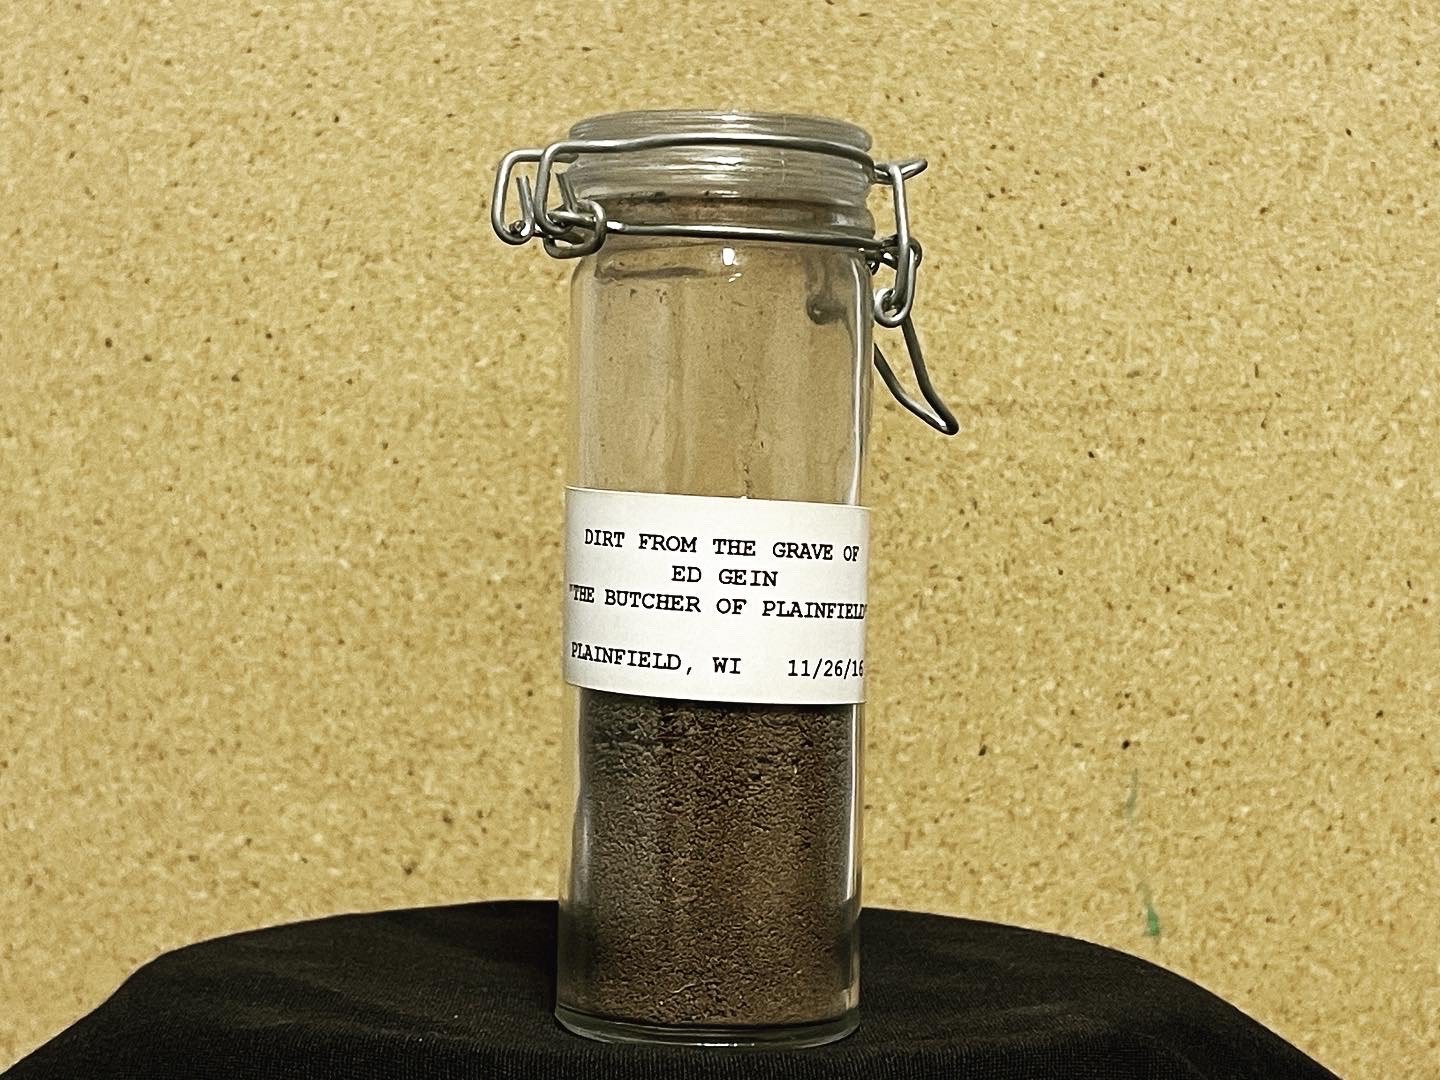 Collected Dirt From The Grave Of Ed Gein